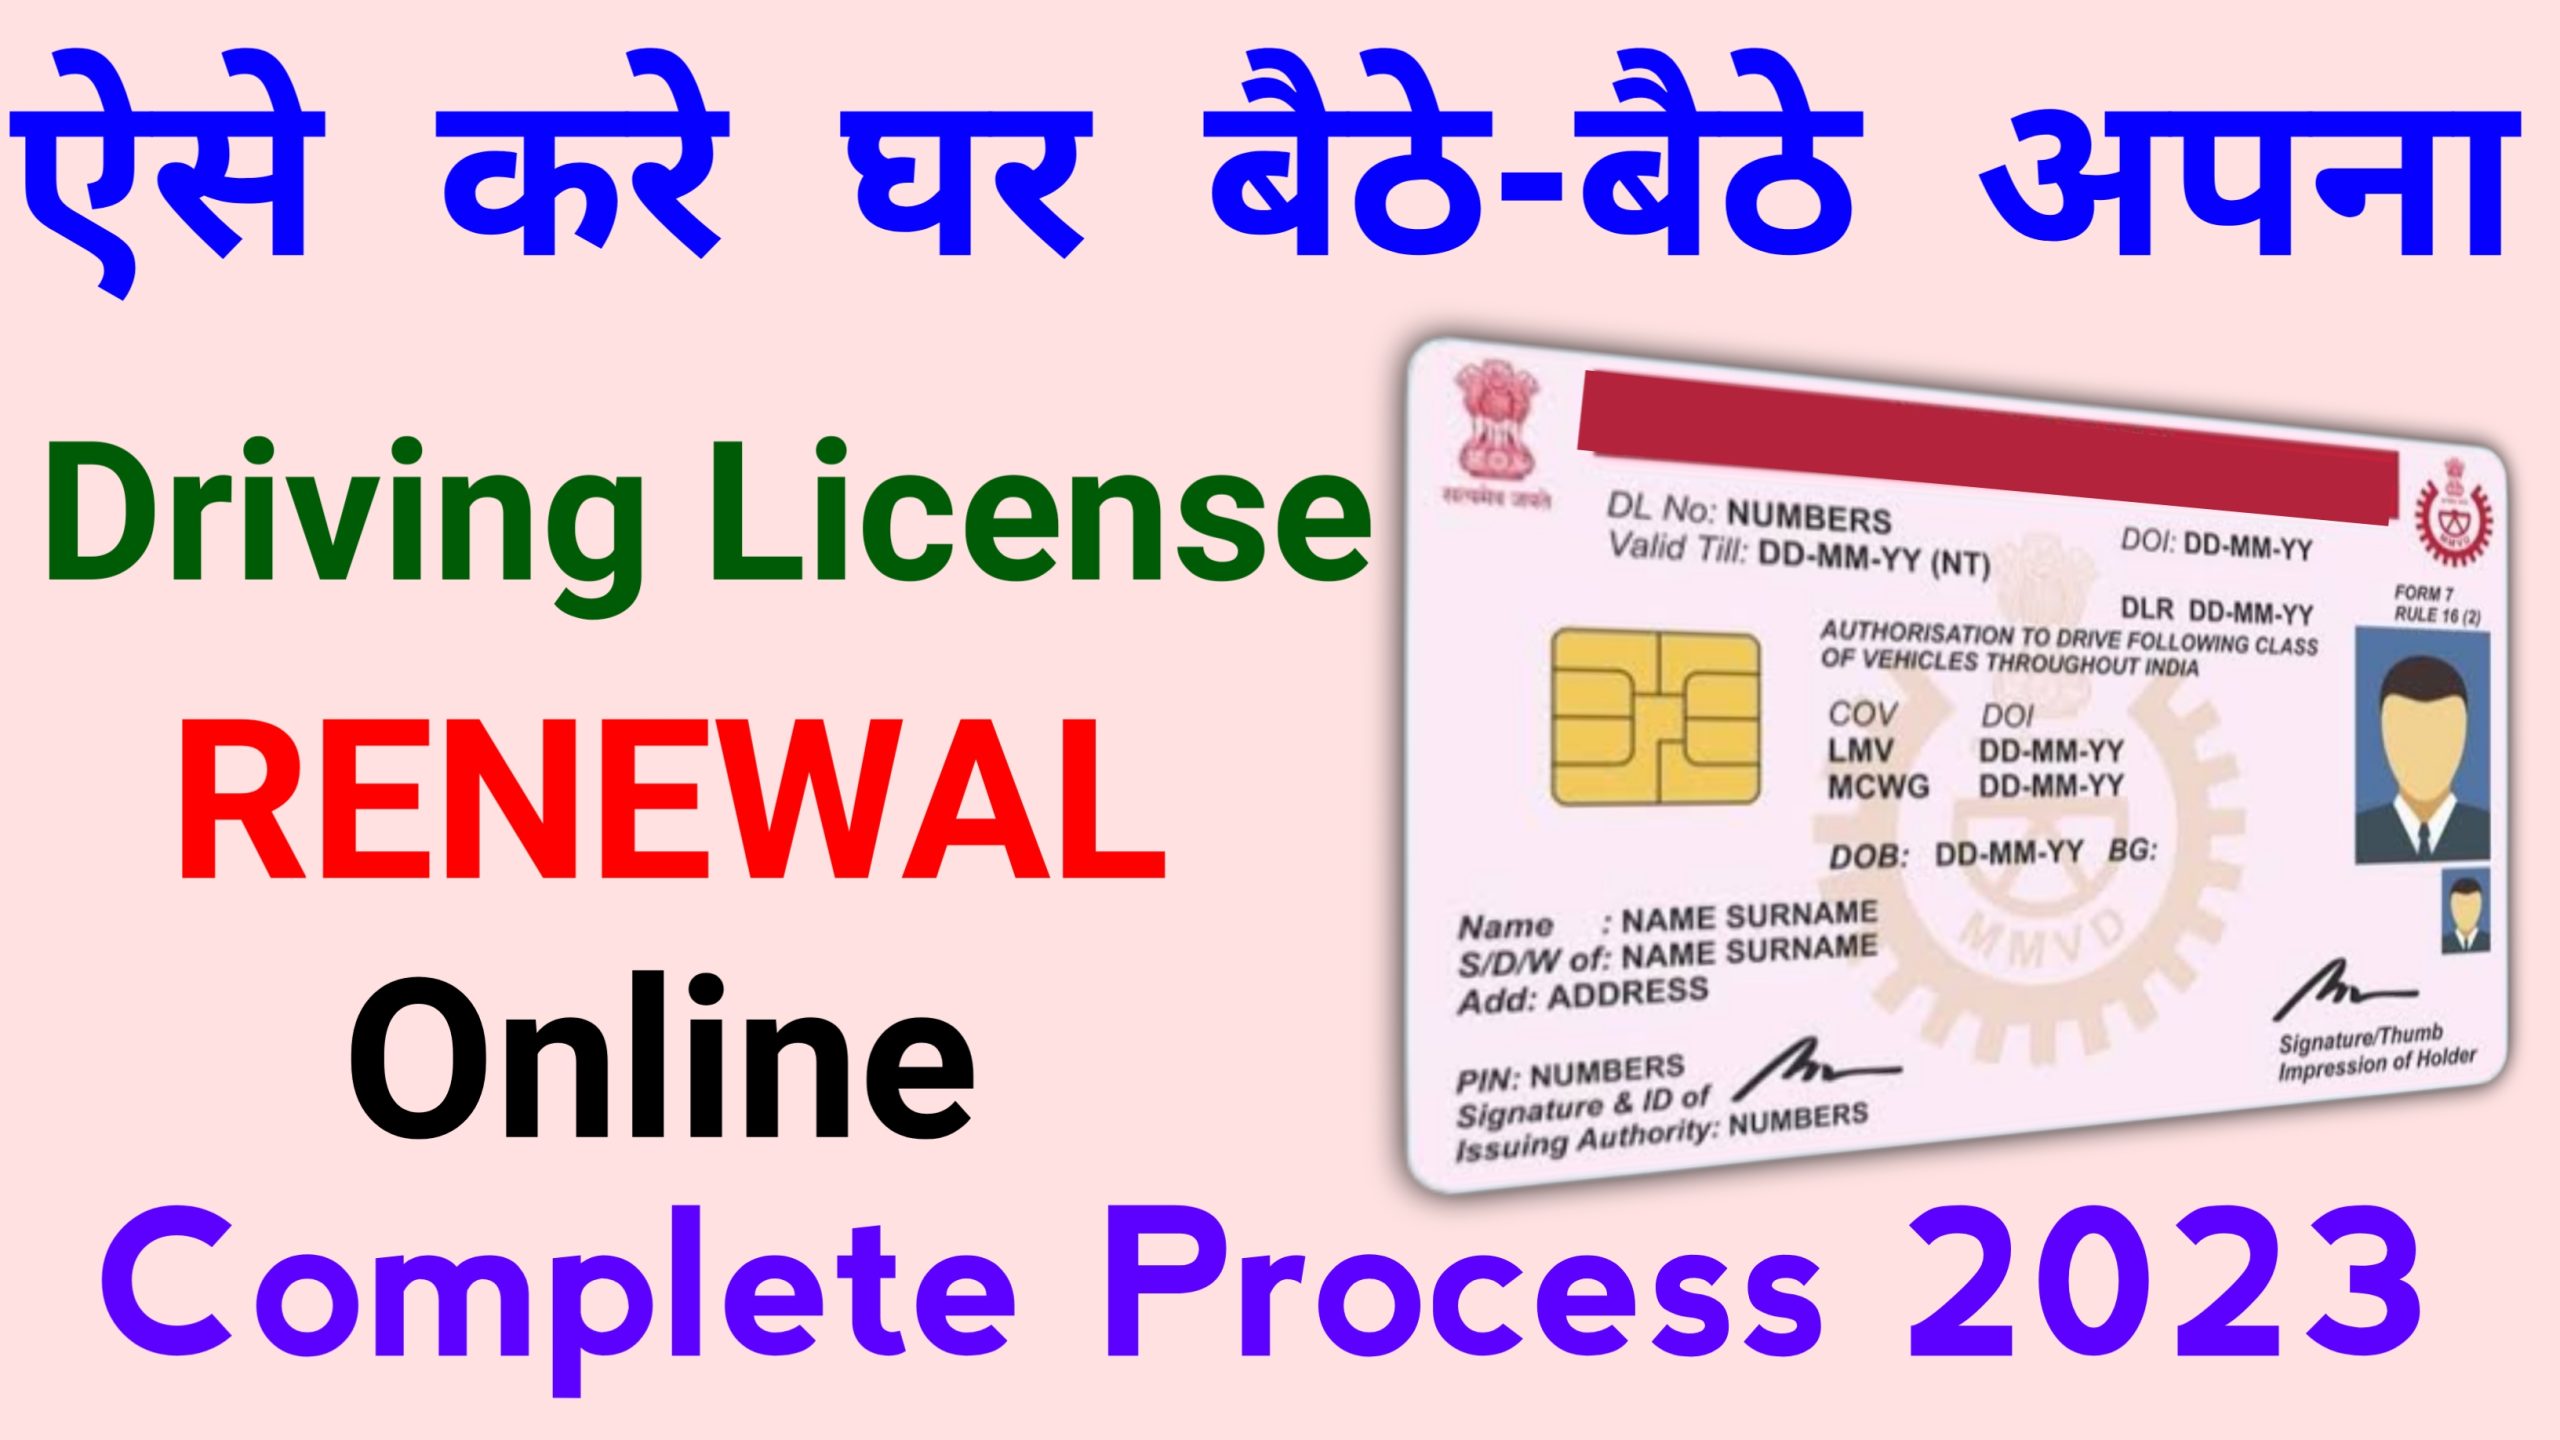 How to Renewal Driving Licence Online in Hindi